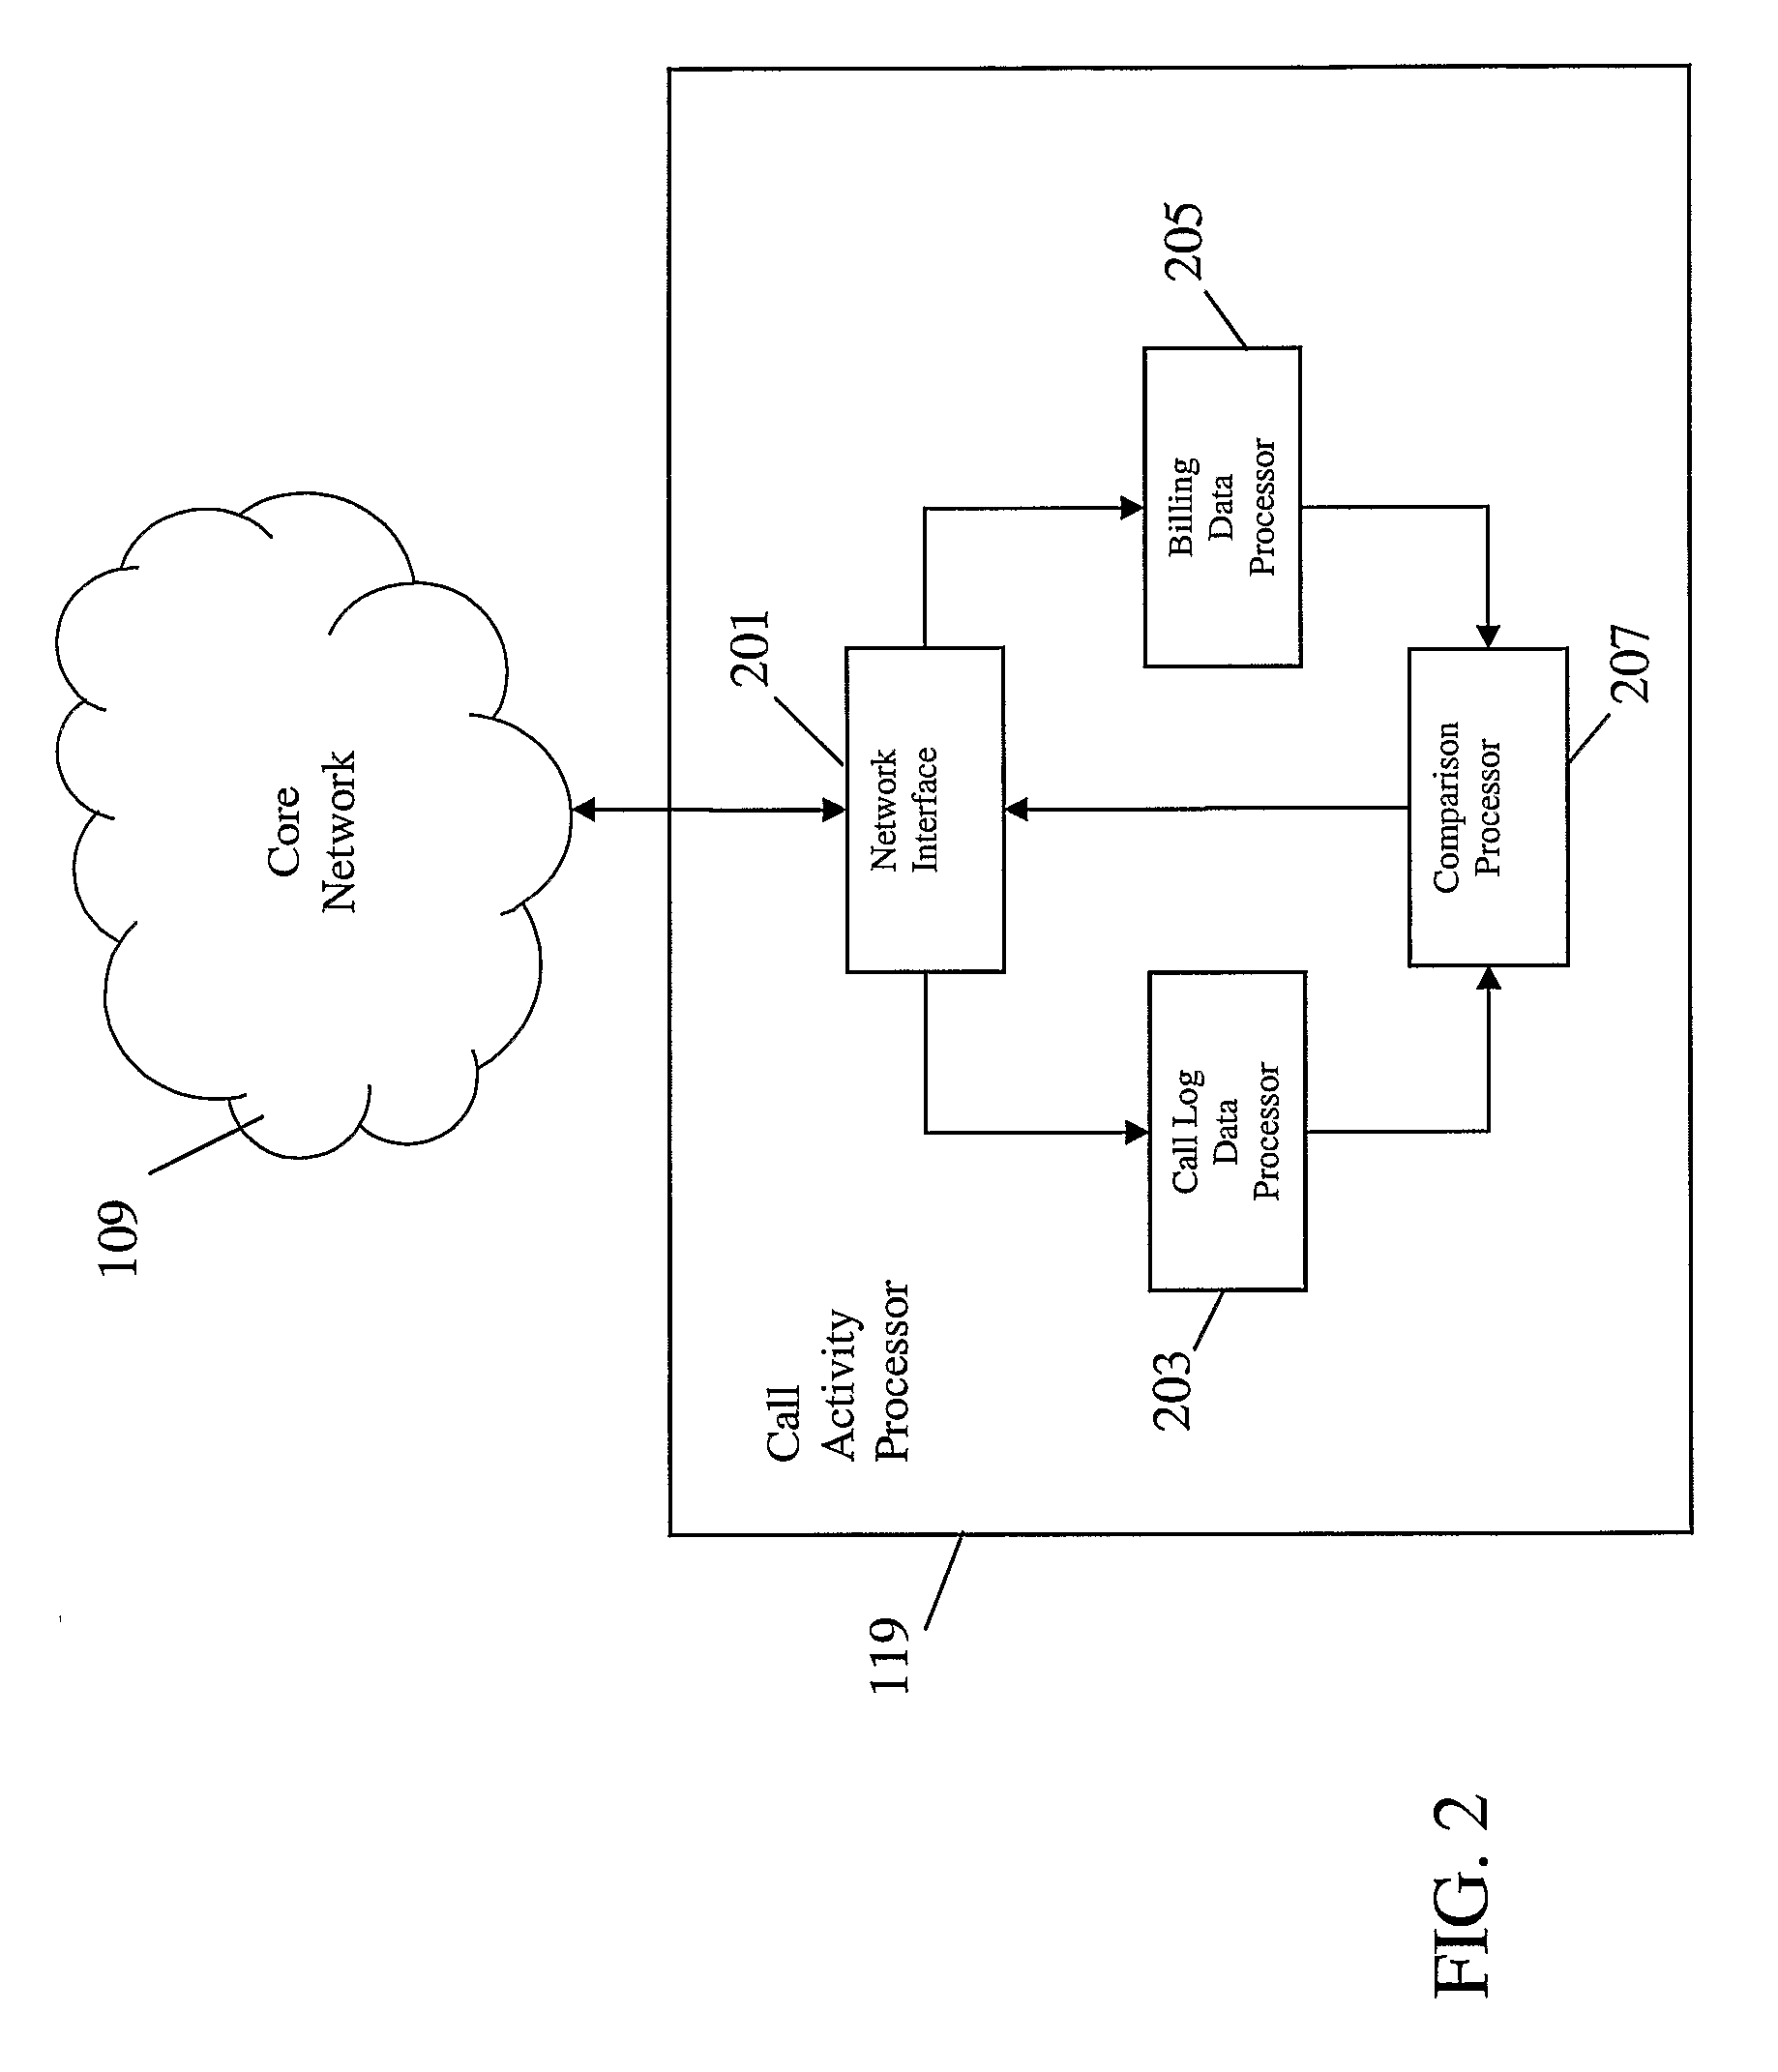 Unauthorized call activity detection in a cellular communication system